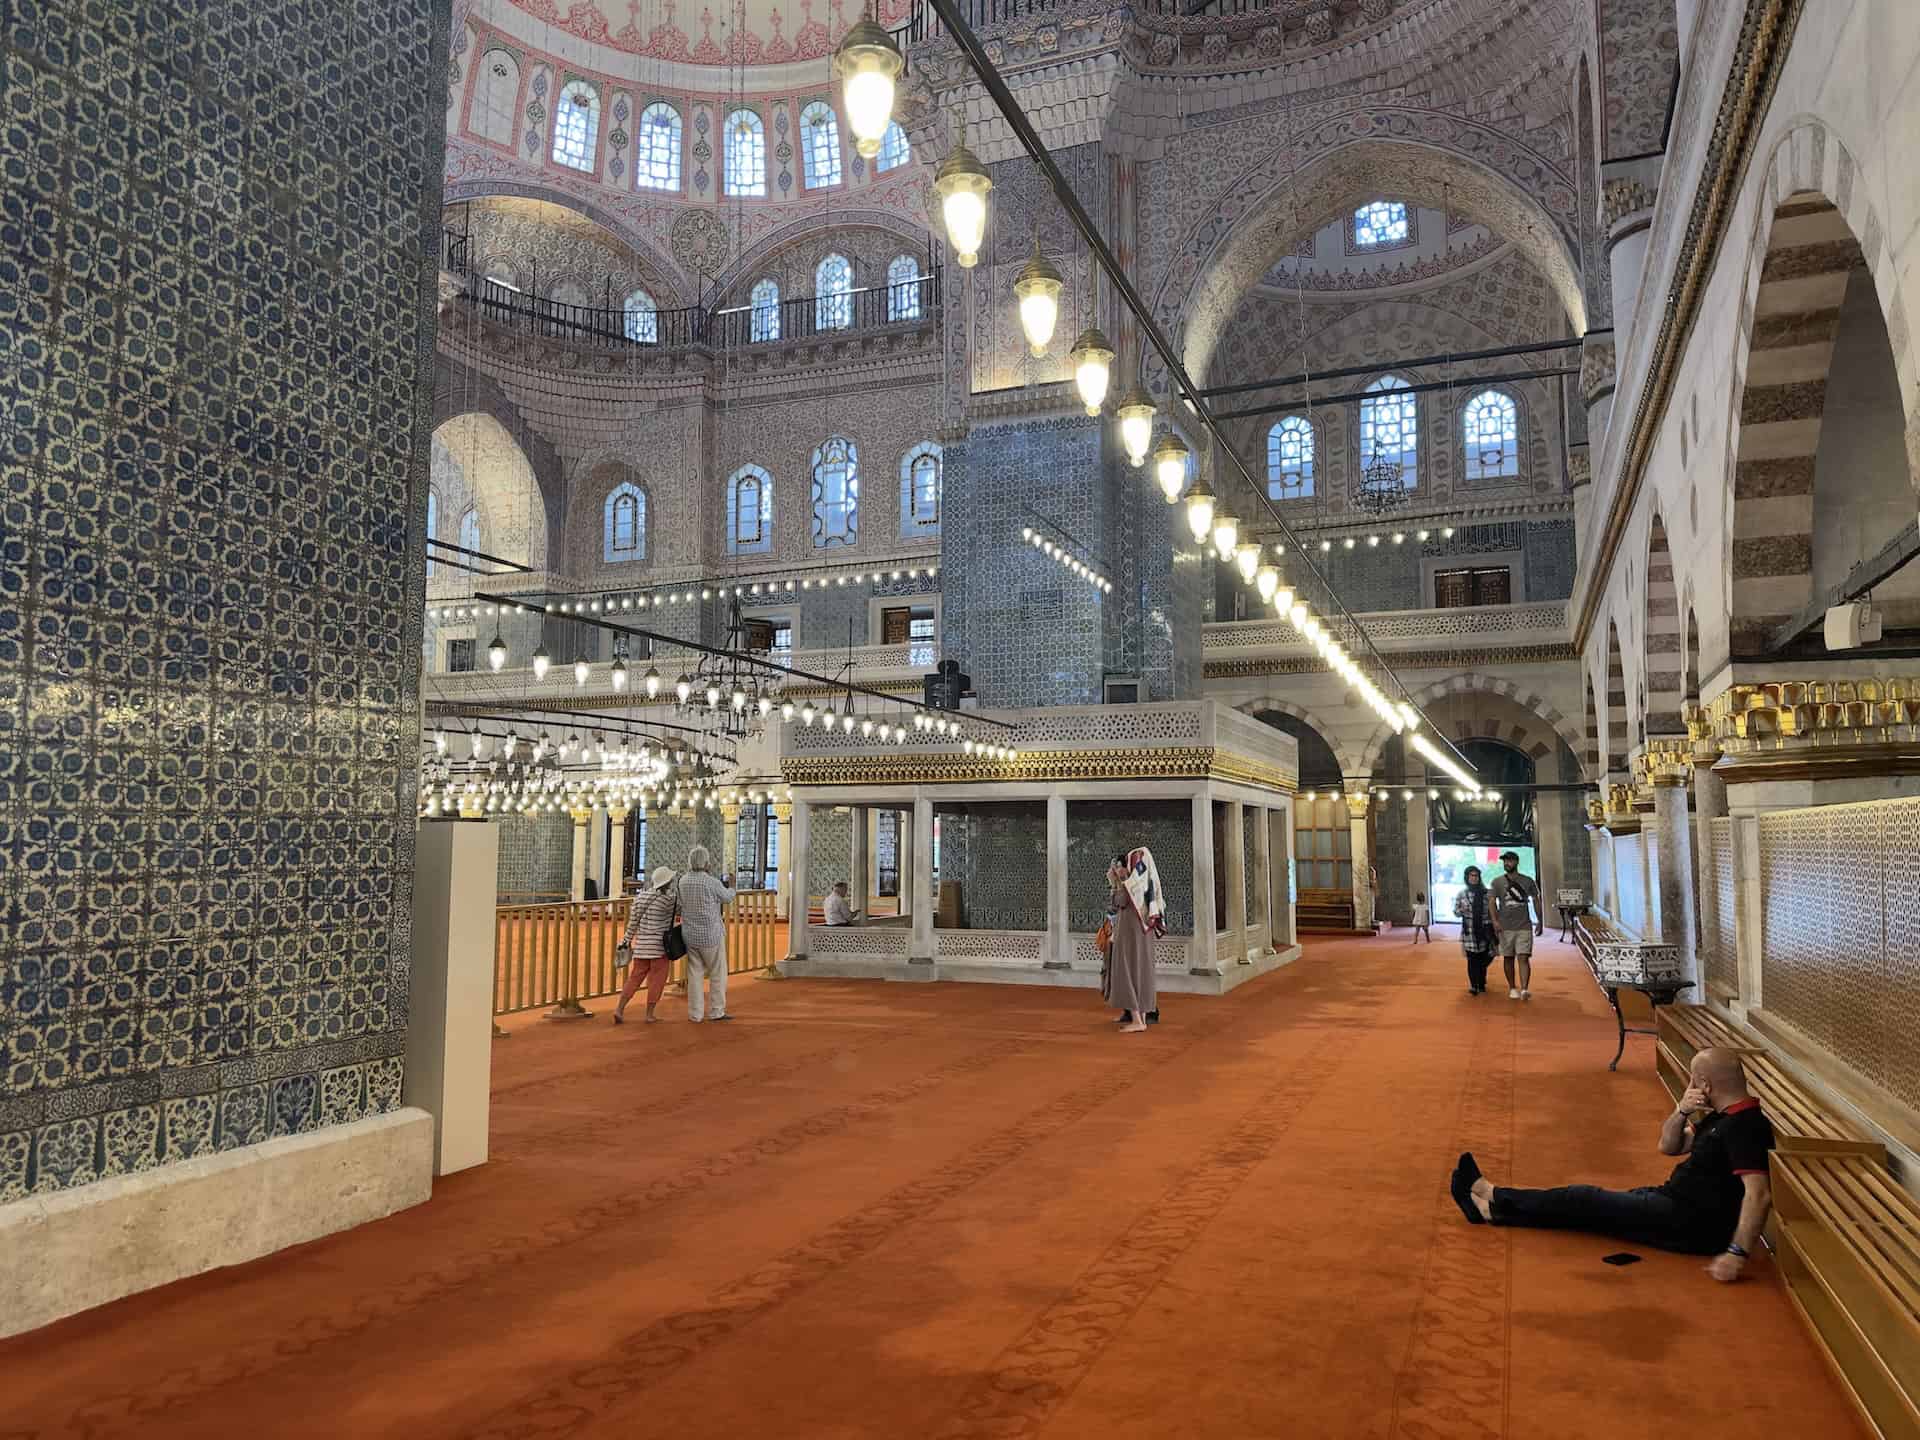 Rear of the prayer hall at the New Mosque in Istanbul, Turkey